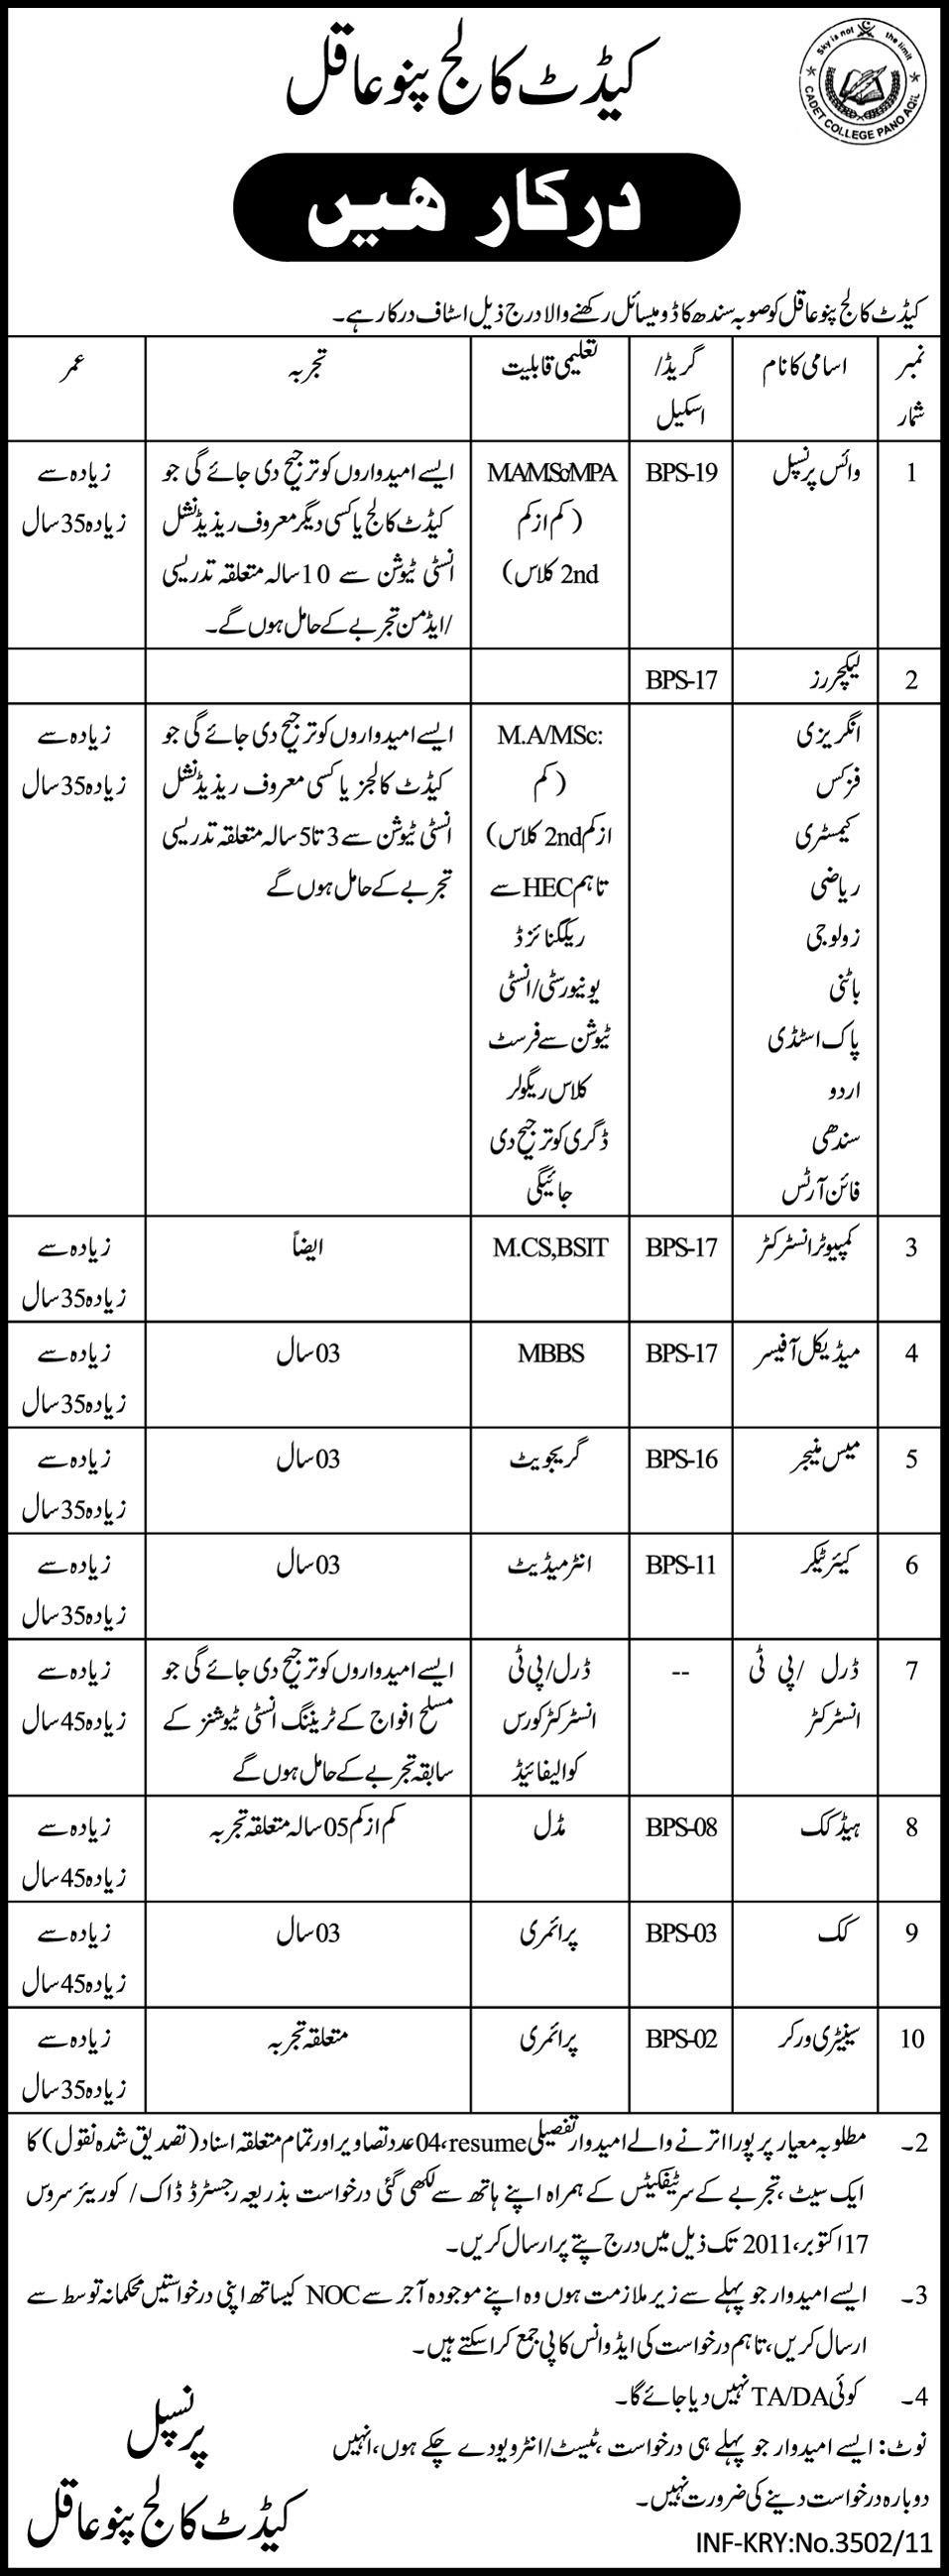 Cadet College Pano Aqil Required Faculty and Administrative Staff